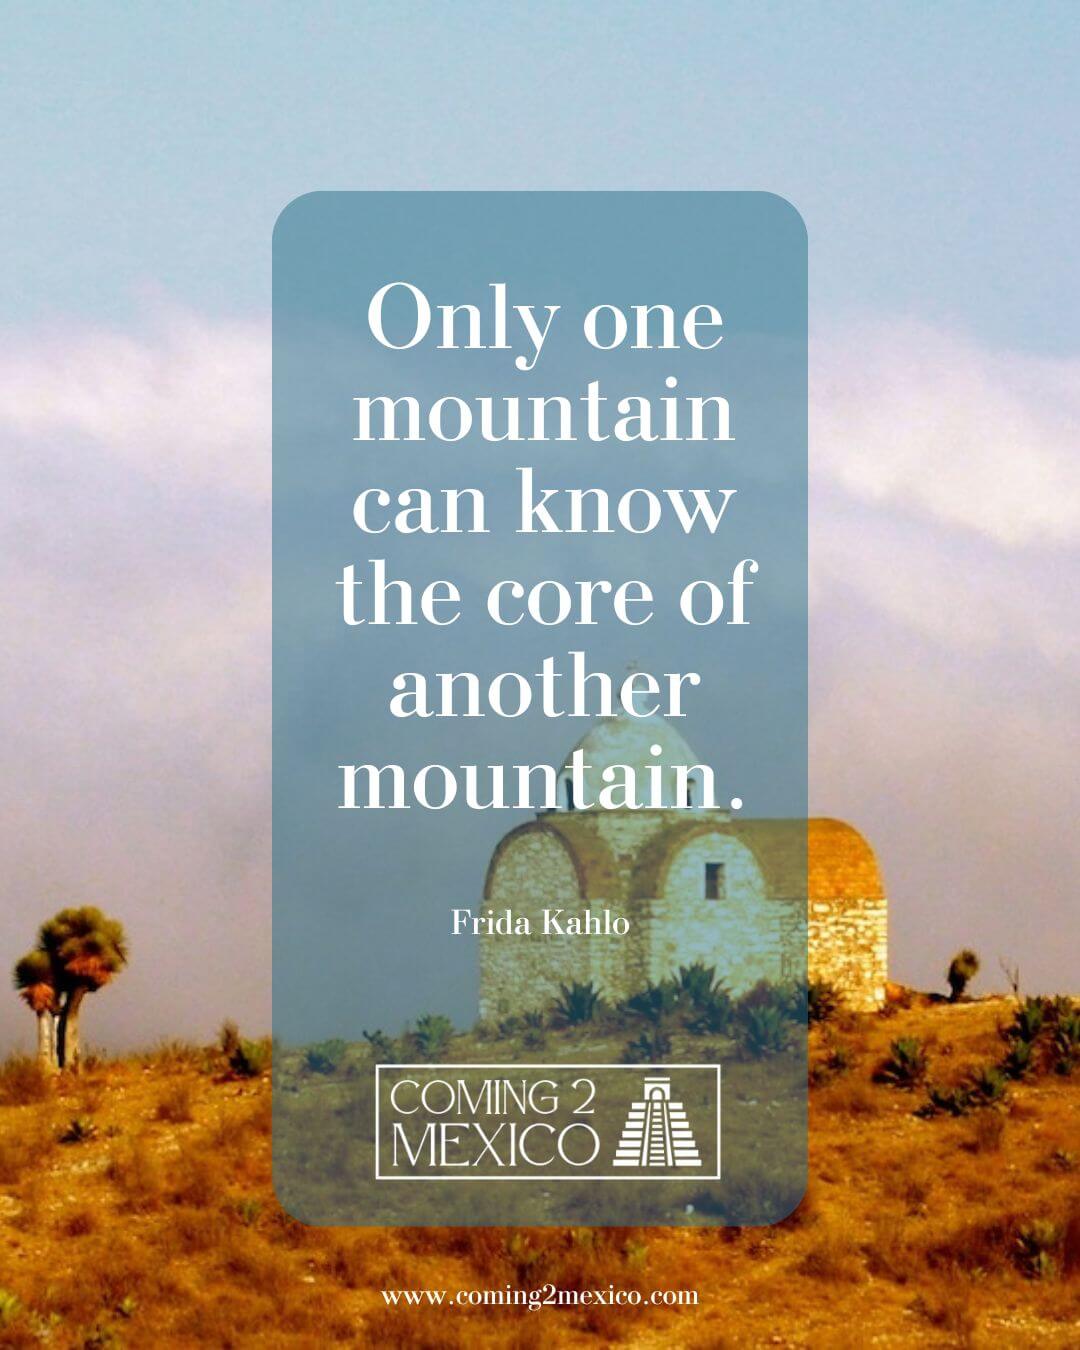 “Only one mountain can know the core of another mountain.” - Frida Kahlo